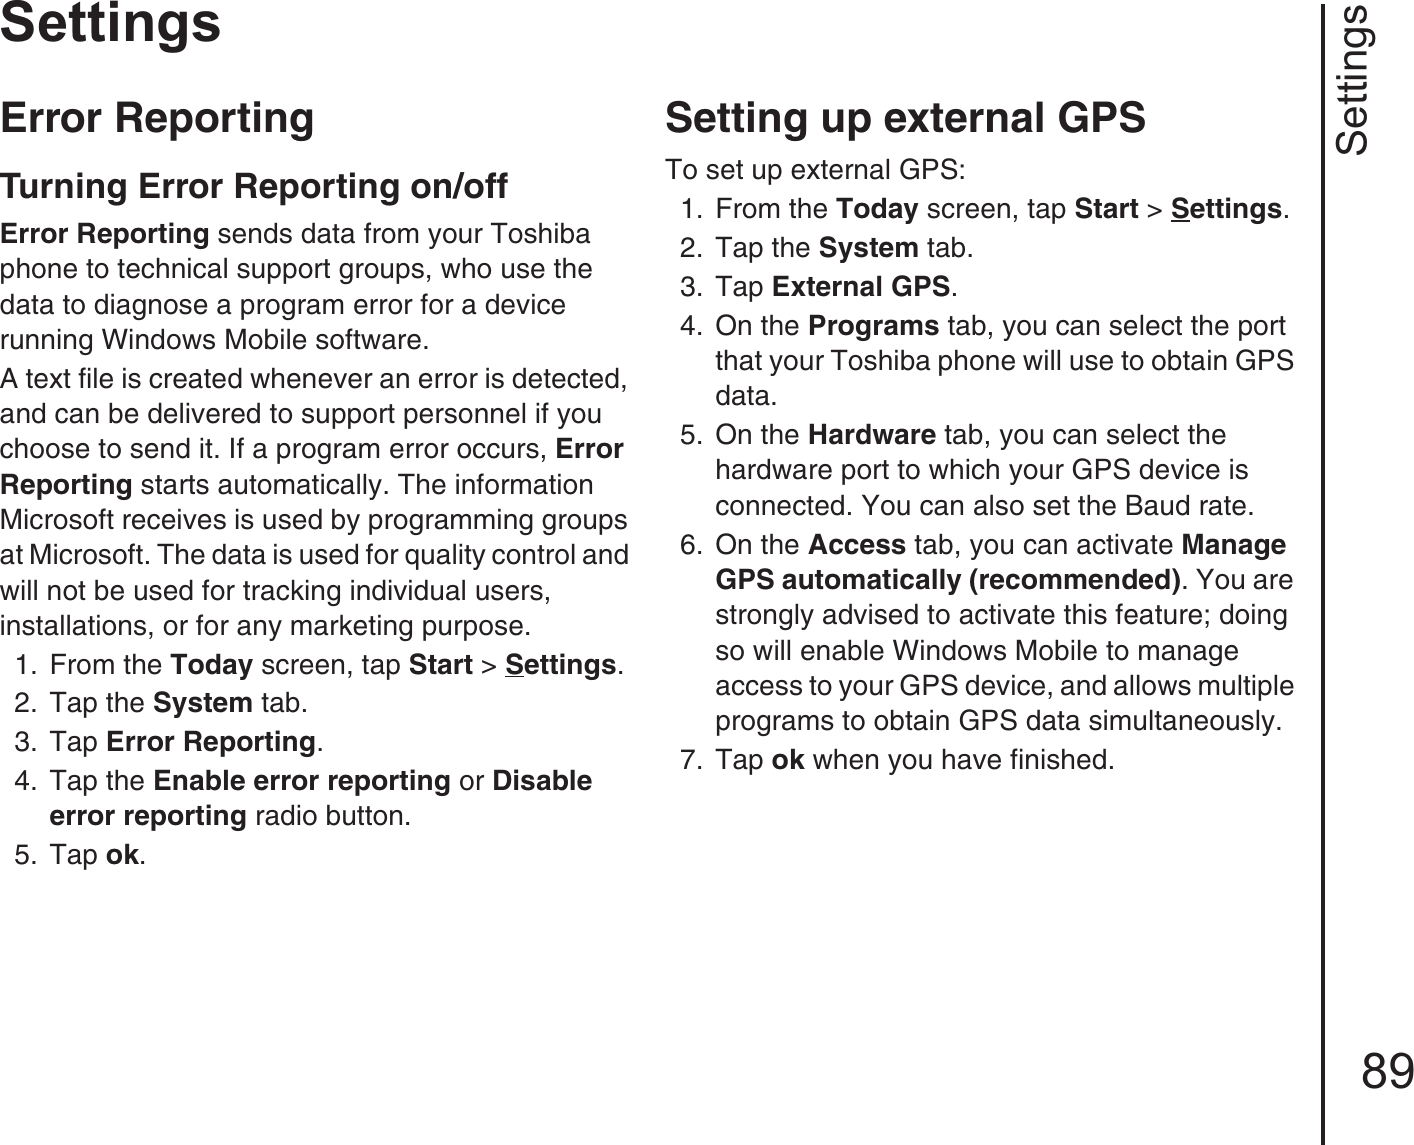 Settings89SettingsError Reporting Turning Error Reporting on/offError Reporting sends data from your Toshiba phone to technical support groups, who use the data to diagnose a program error for a device running Windows Mobile software.A text file is created whenever an error is detected, and can be delivered to support personnel if you choose to send it. If a program error occurs, Error Reporting starts automatically. The information Microsoft receives is used by programming groups at Microsoft. The data is used for quality control and will not be used for tracking individual users, installations, or for any marketing purpose.1.  From the Today screen, tap Start &gt; Settings.2.  Tap the System tab.3.  Tap Error Reporting. 4.  Tap the Enable error reporting or Disable error reporting radio button.5.  Tap ok.Setting up external GPSTo set up external GPS:1.  From the Today screen, tap Start &gt; Settings.2.  Tap the System tab.3.  Tap External GPS. 4.  On the Programs tab, you can select the port that your Toshiba phone will use to obtain GPS data.5.  On the Hardware tab, you can select the hardware port to which your GPS device is connected. You can also set the Baud rate.6.  On the Access tab, you can activate Manage GPS automatically (recommended). You are strongly advised to activate this feature; doing so will enable Windows Mobile to manage access to your GPS device, and allows multiple programs to obtain GPS data simultaneously.7.  Tap ok when you have finished.